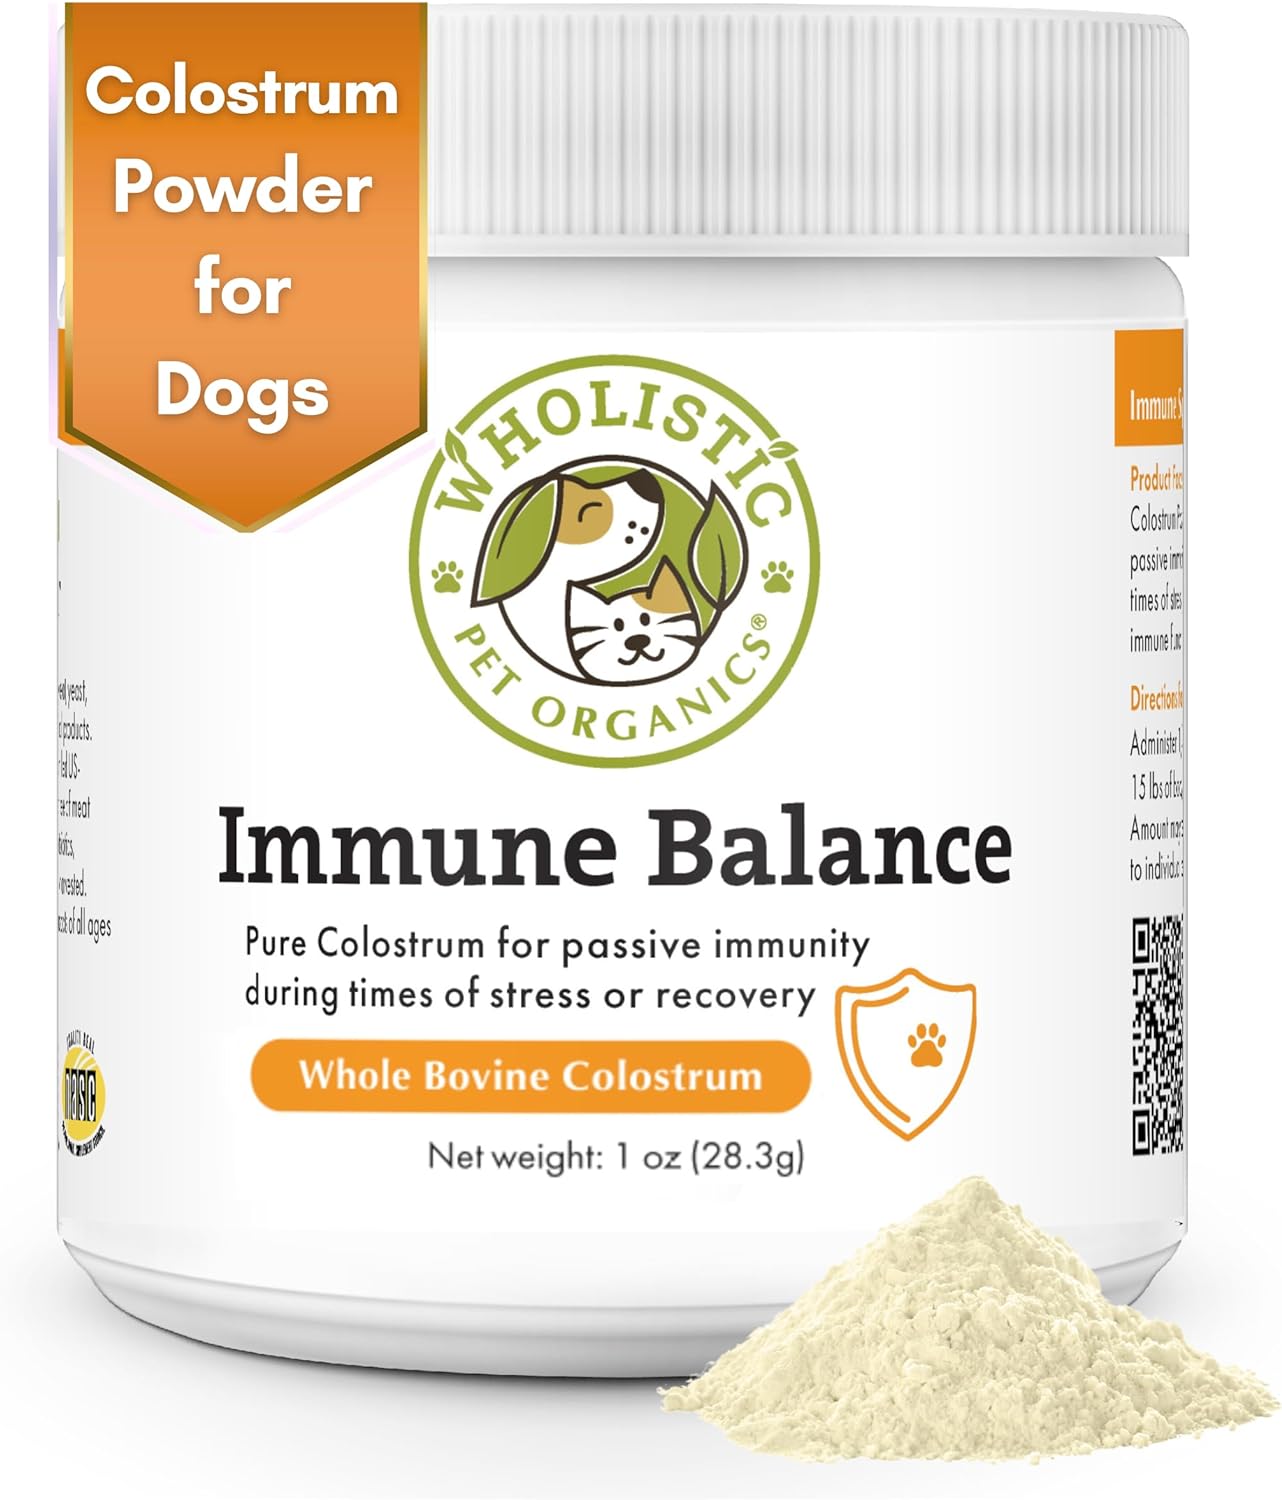 Wholistic Pet Organics: Bovine Colostrum for Dogs and Cats - 1 oz - Organic Dog Immune Support Supplement for Allergy and Itch Relief - Colostrum Powder for Pets - Allergy Medication for Cats & Dogs